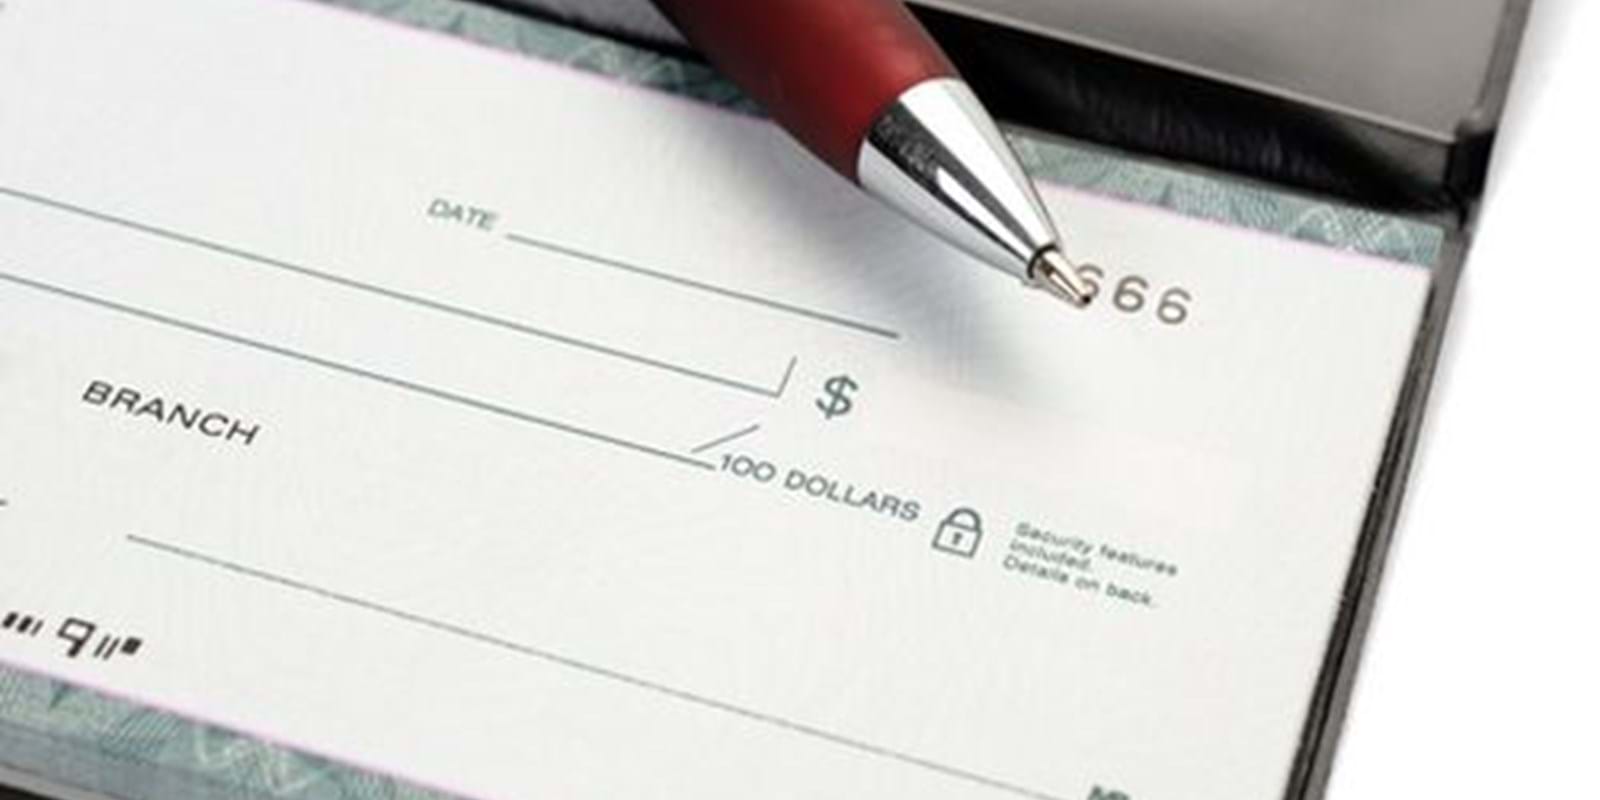 The offer to deliver an uncertified cheque, made at the hearing, does not constitute a discharge payment